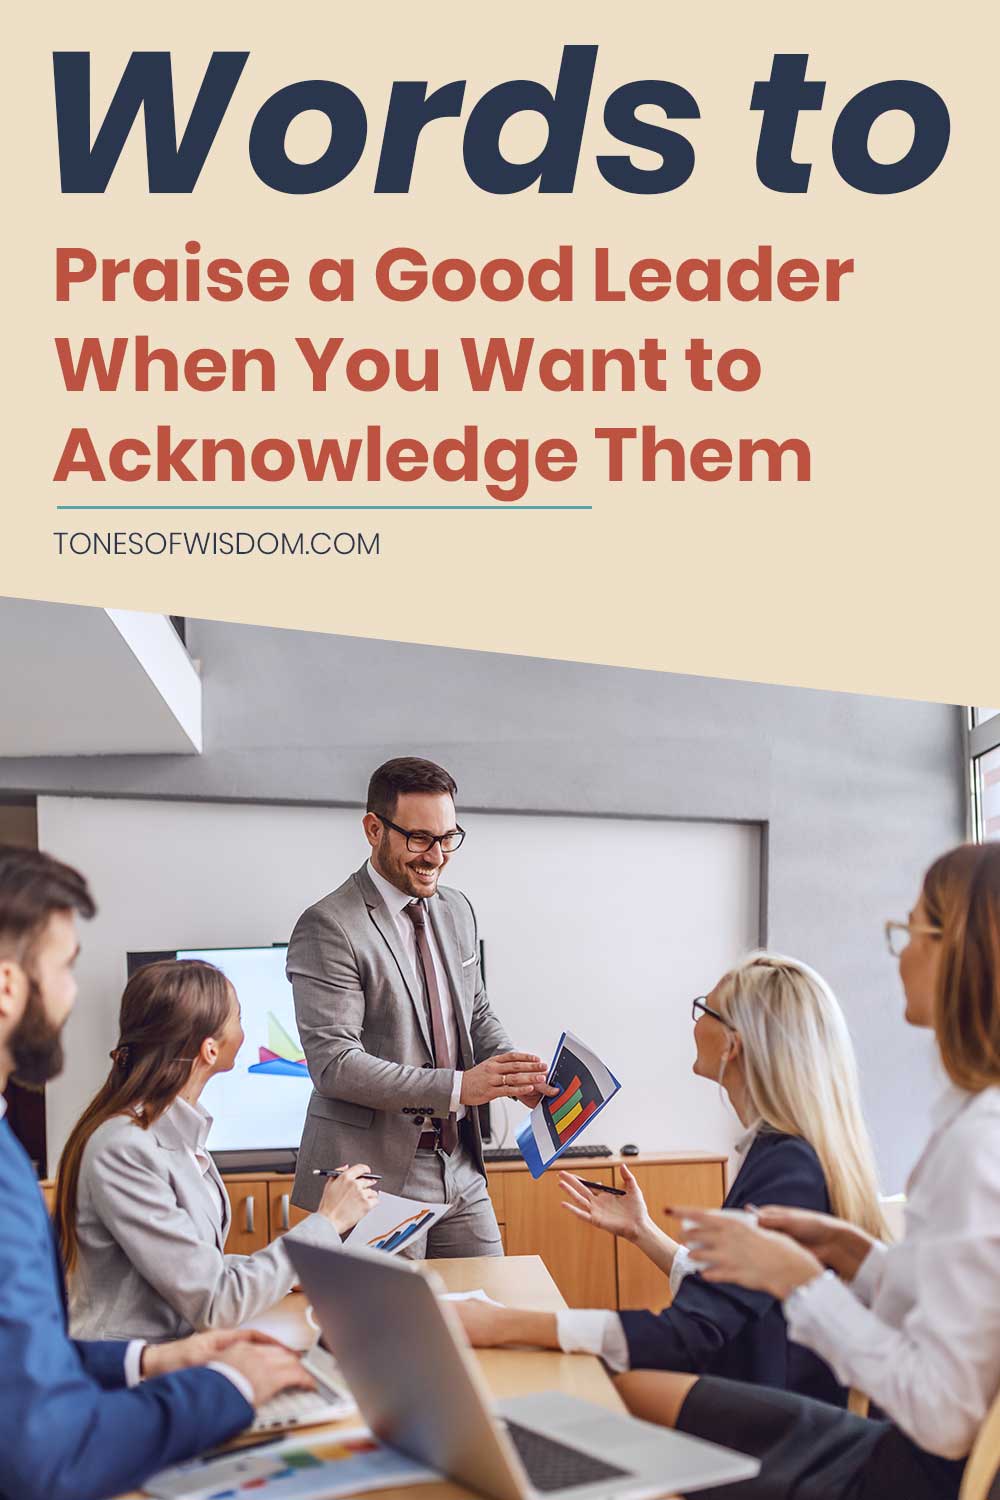 Words to Praise a Good Leader When You Want to Acknowledge Them